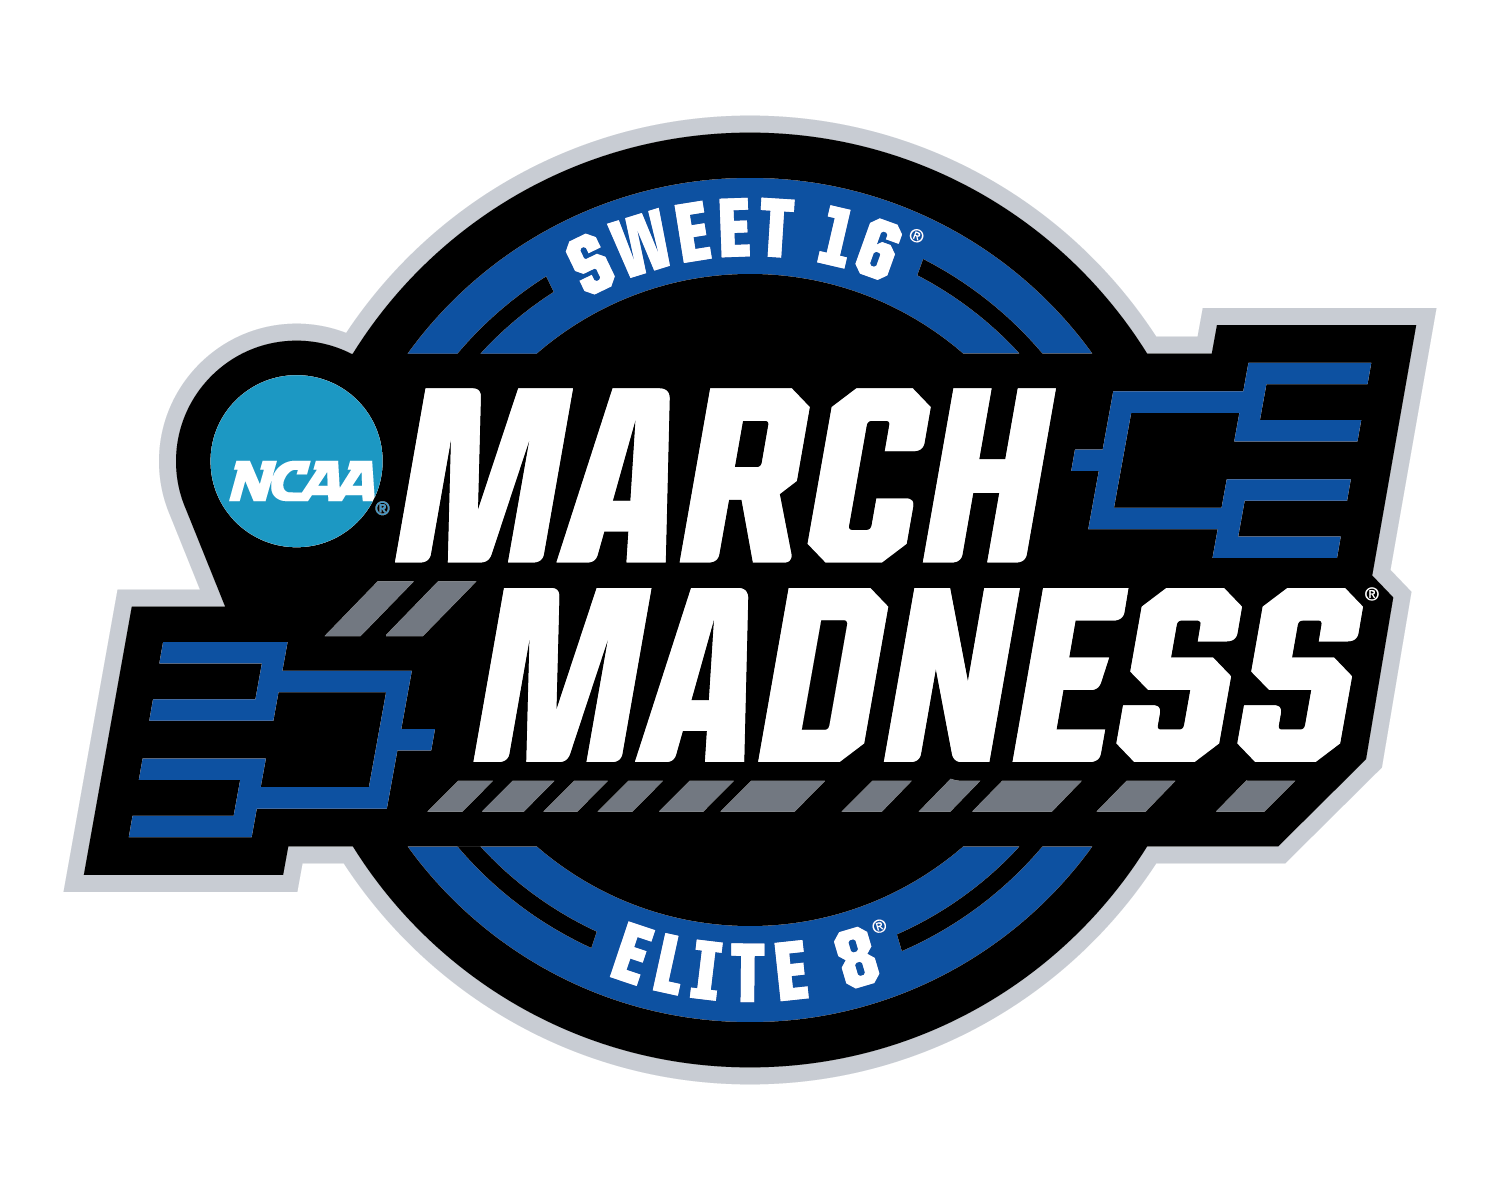 Sweet 16  |  Elite 8  |  NCAA March Madness